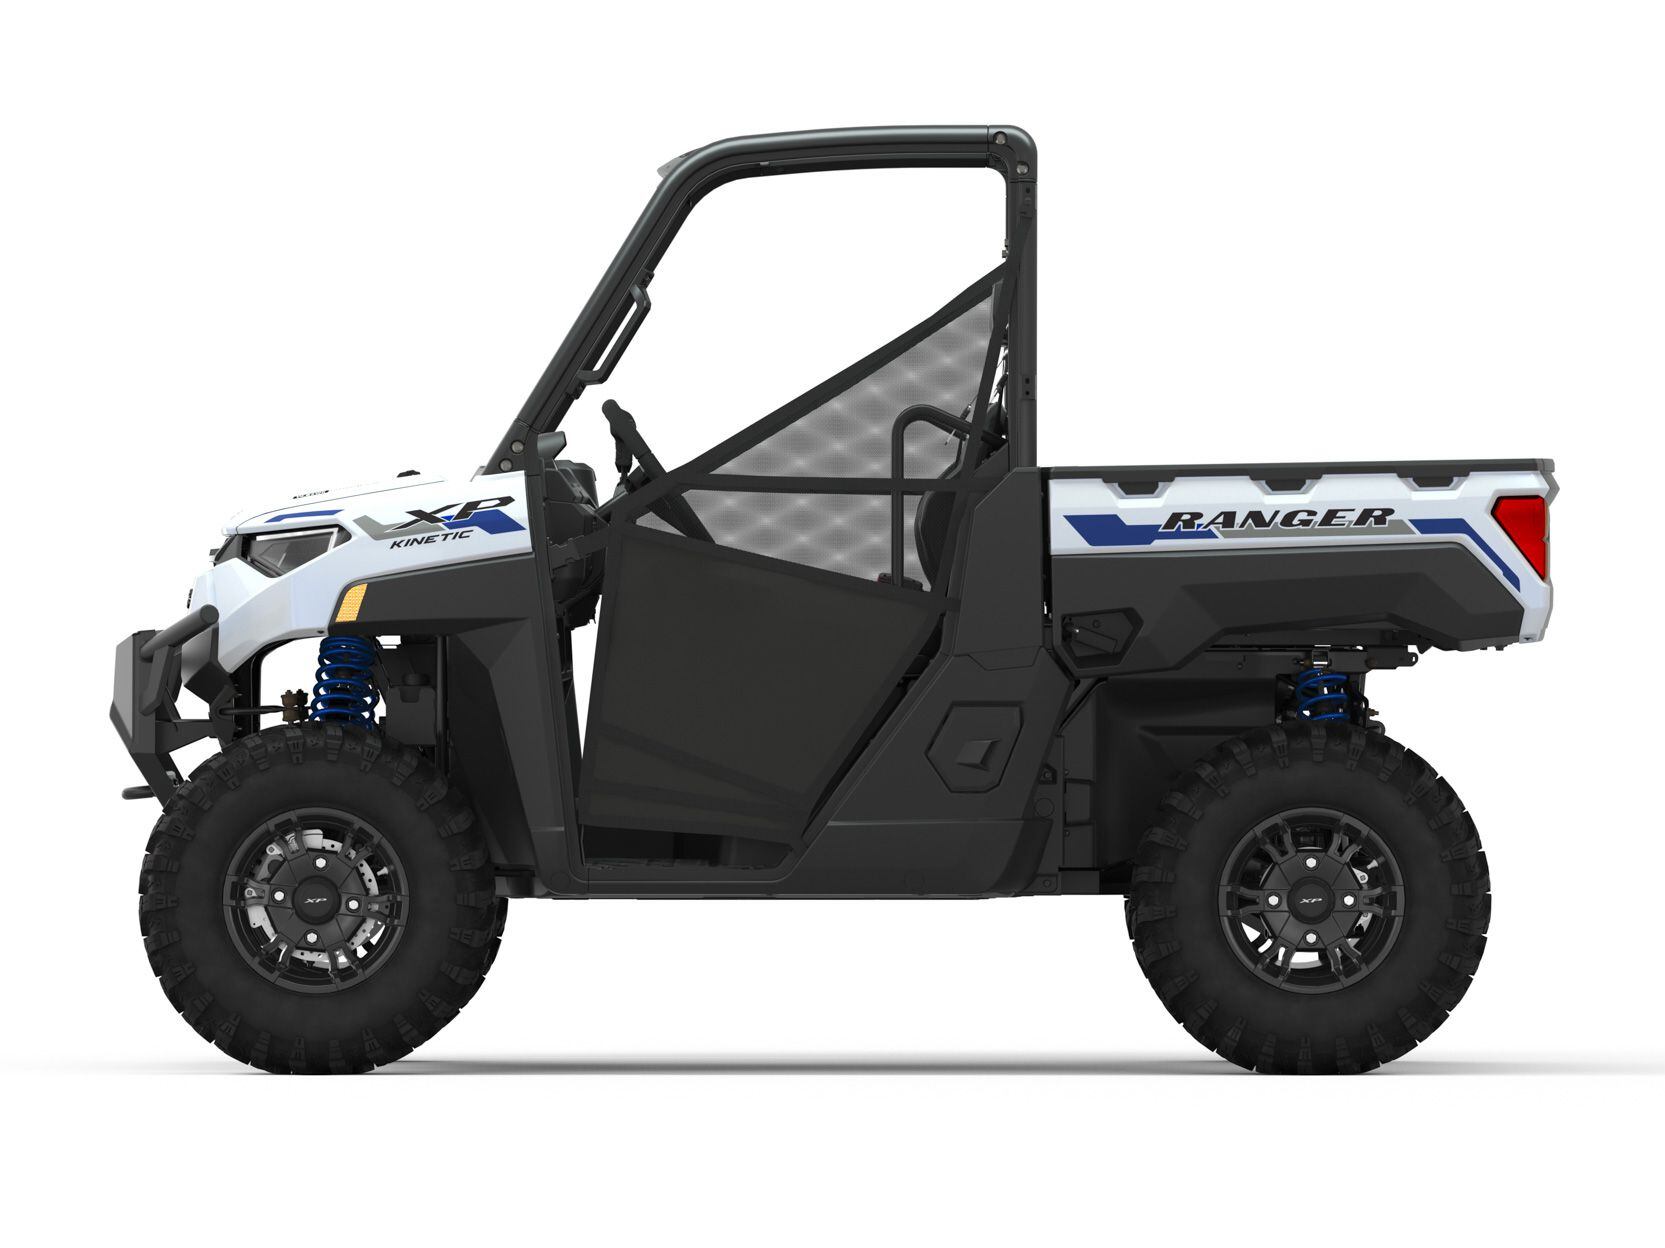 A side view of the 2023 Polaris Ranger XP Kinetic.